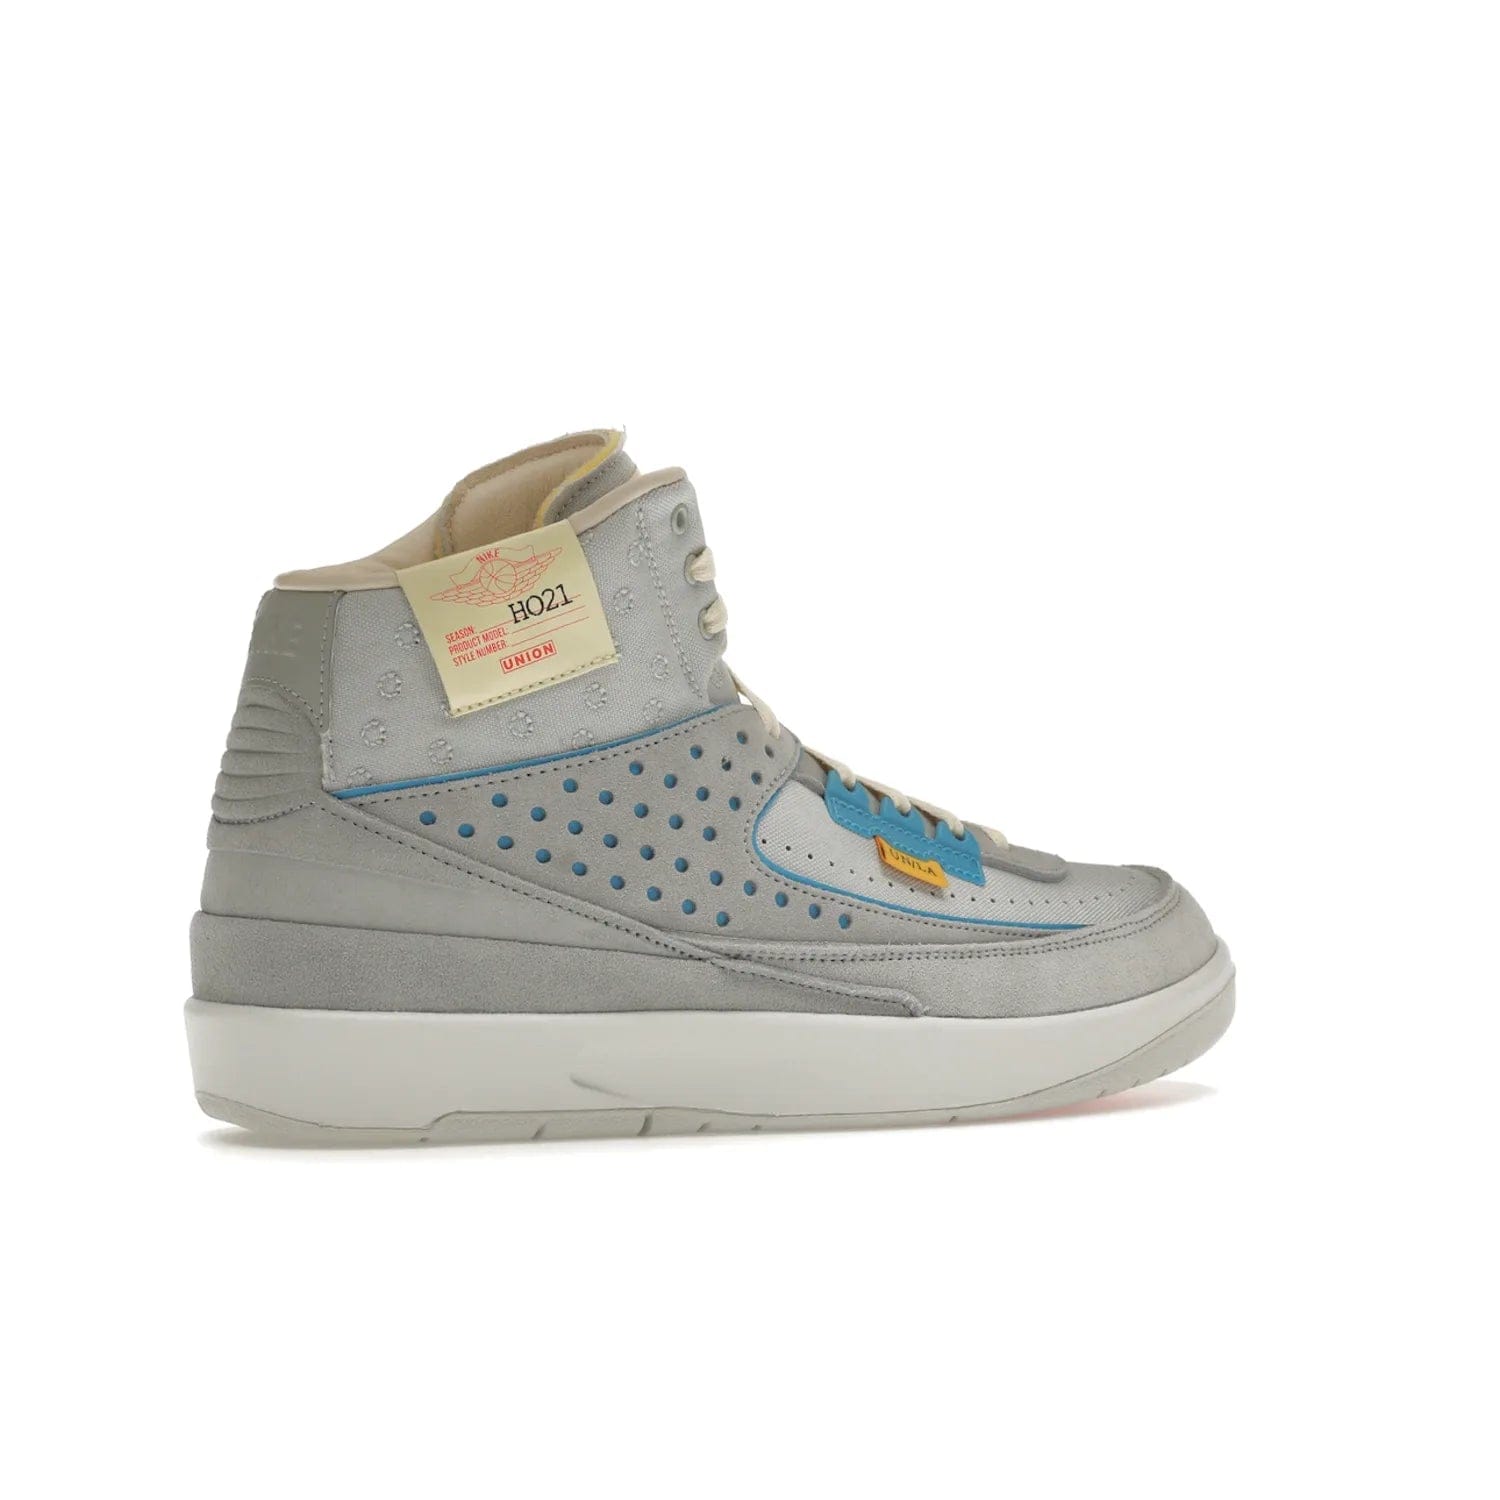 Jordan 2 Retro SP Union Grey Fog - Image 34 - Only at www.BallersClubKickz.com - Introducing the Air Jordan 2 Retro SP Union Grey Fog. This intricate sneaker design features a grey canvas upper with light blue eyelets, eyestay patches, and piping, plus custom external tags. Dropping in April 2022, this exclusive release offers a worn-in look and feel.